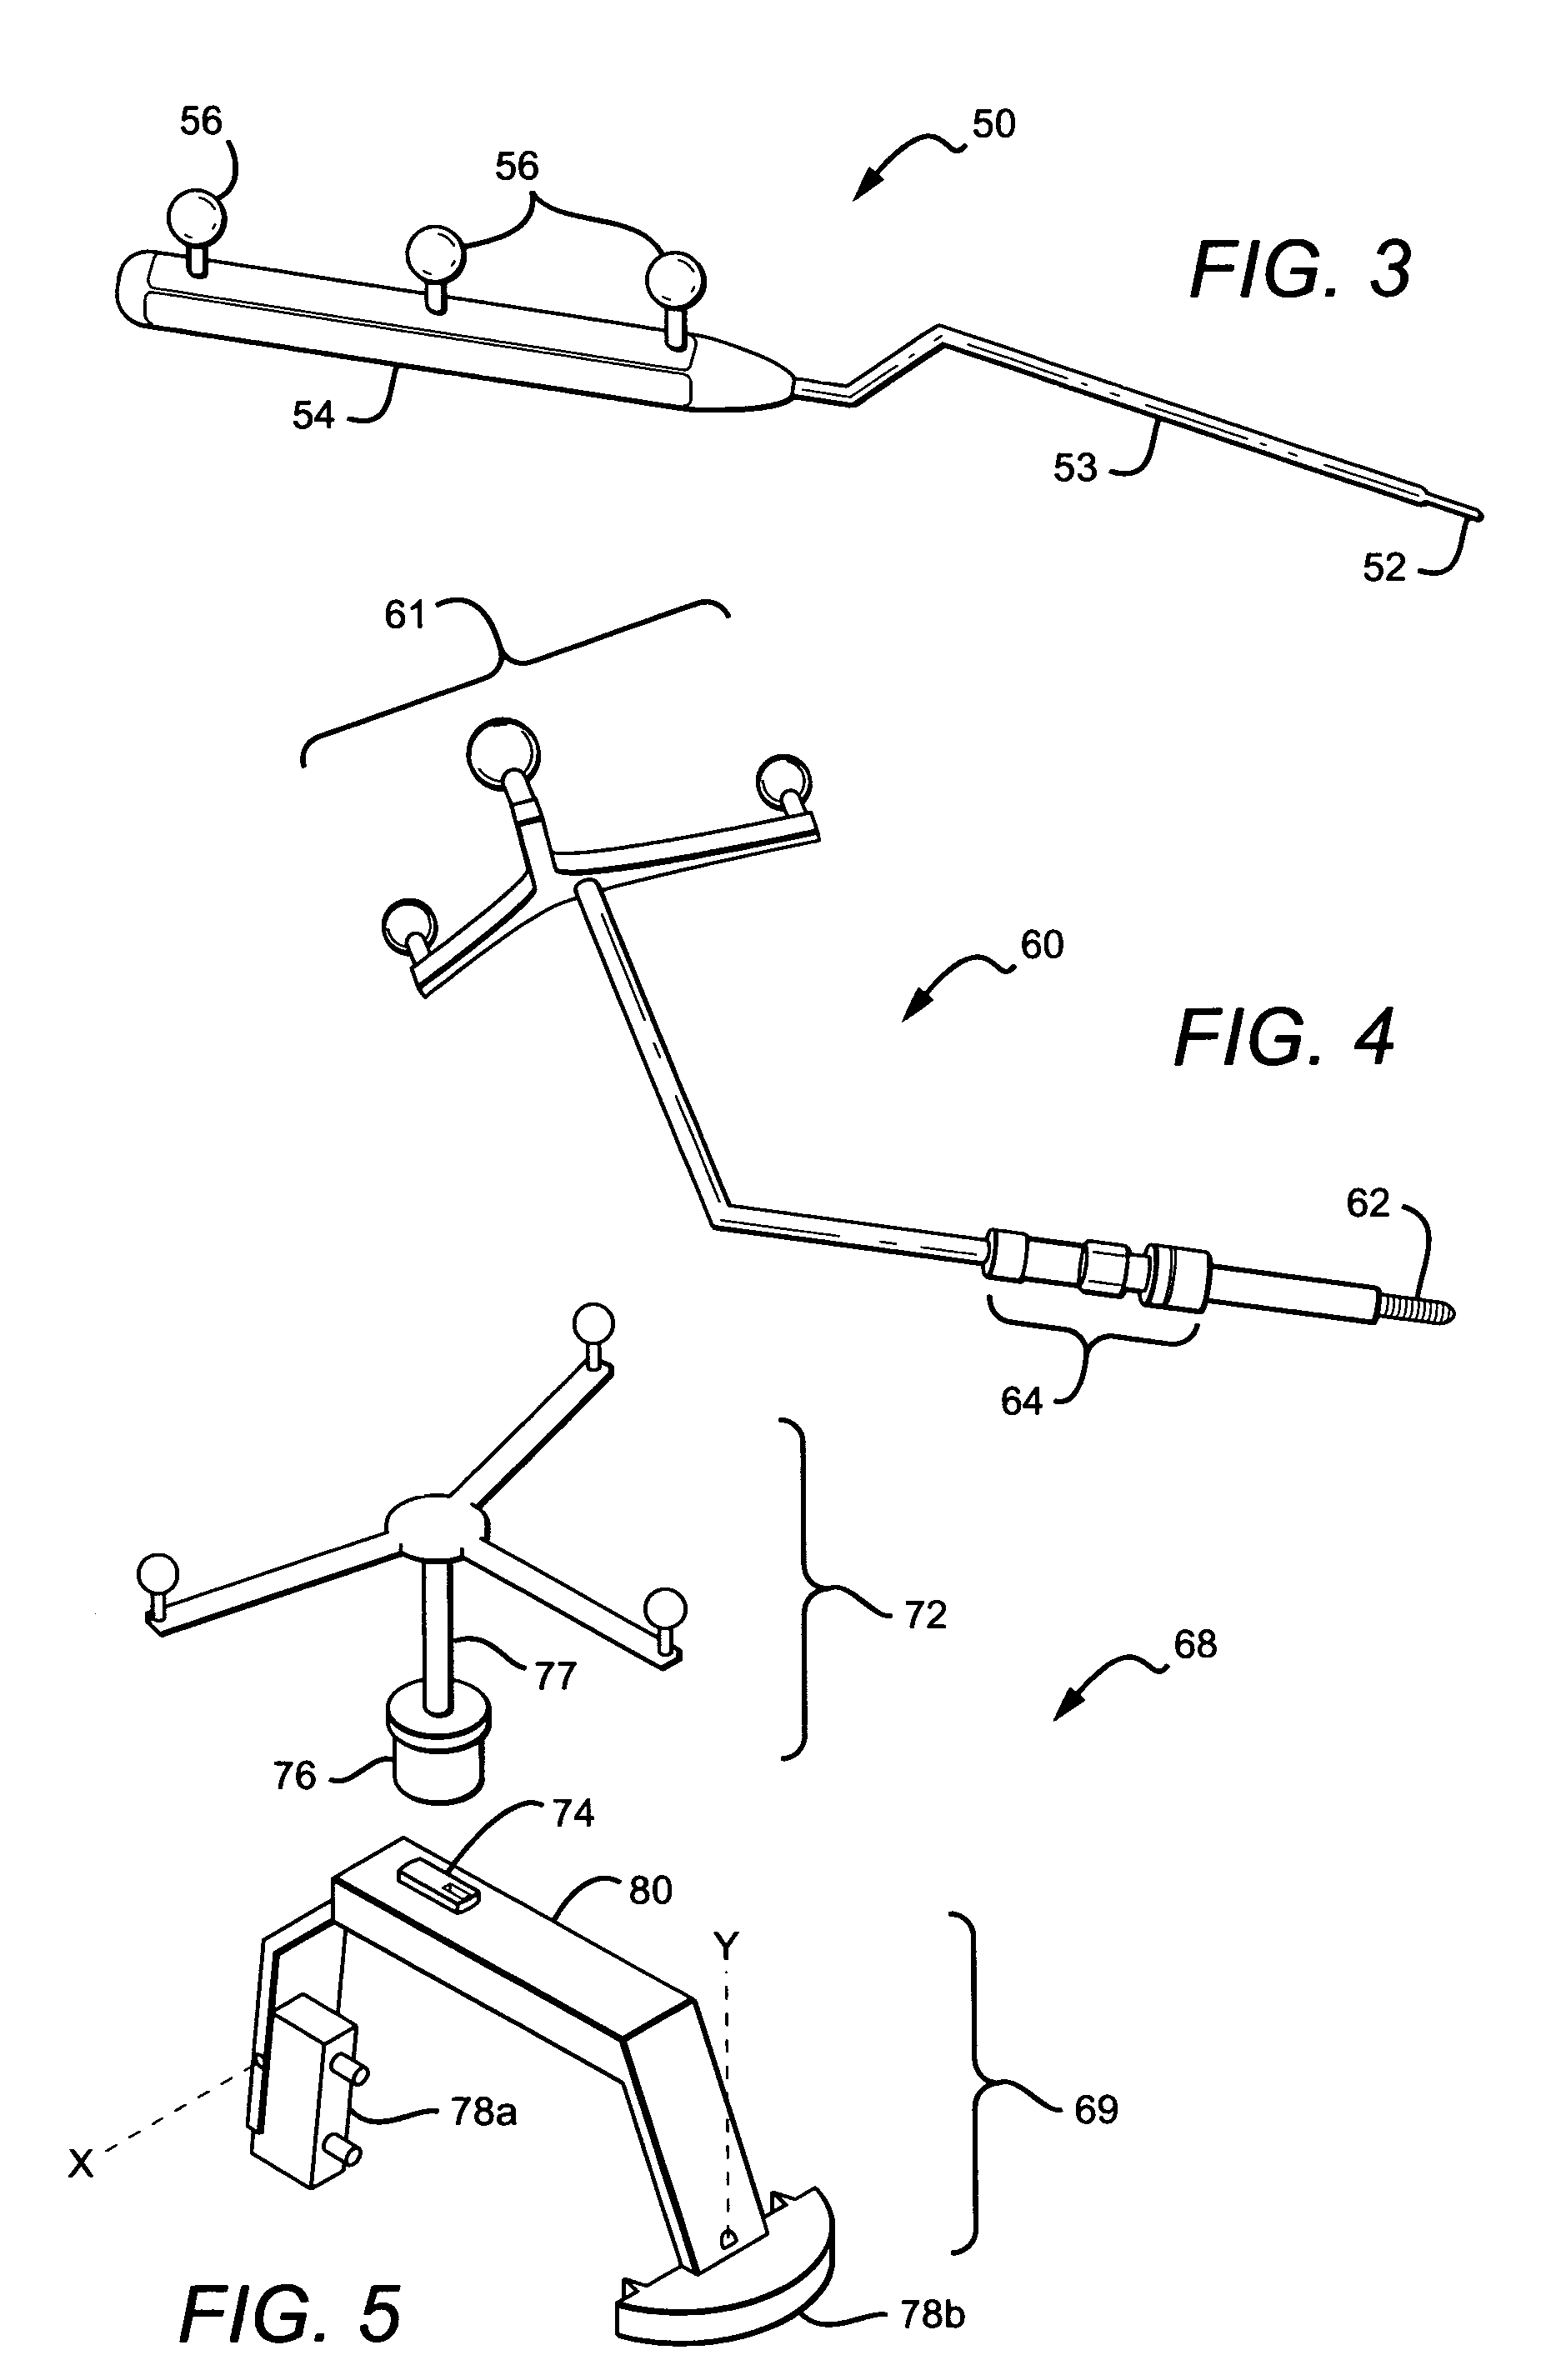 Non-image, computer assisted navigation system for joint replacement surgery with modular implant system